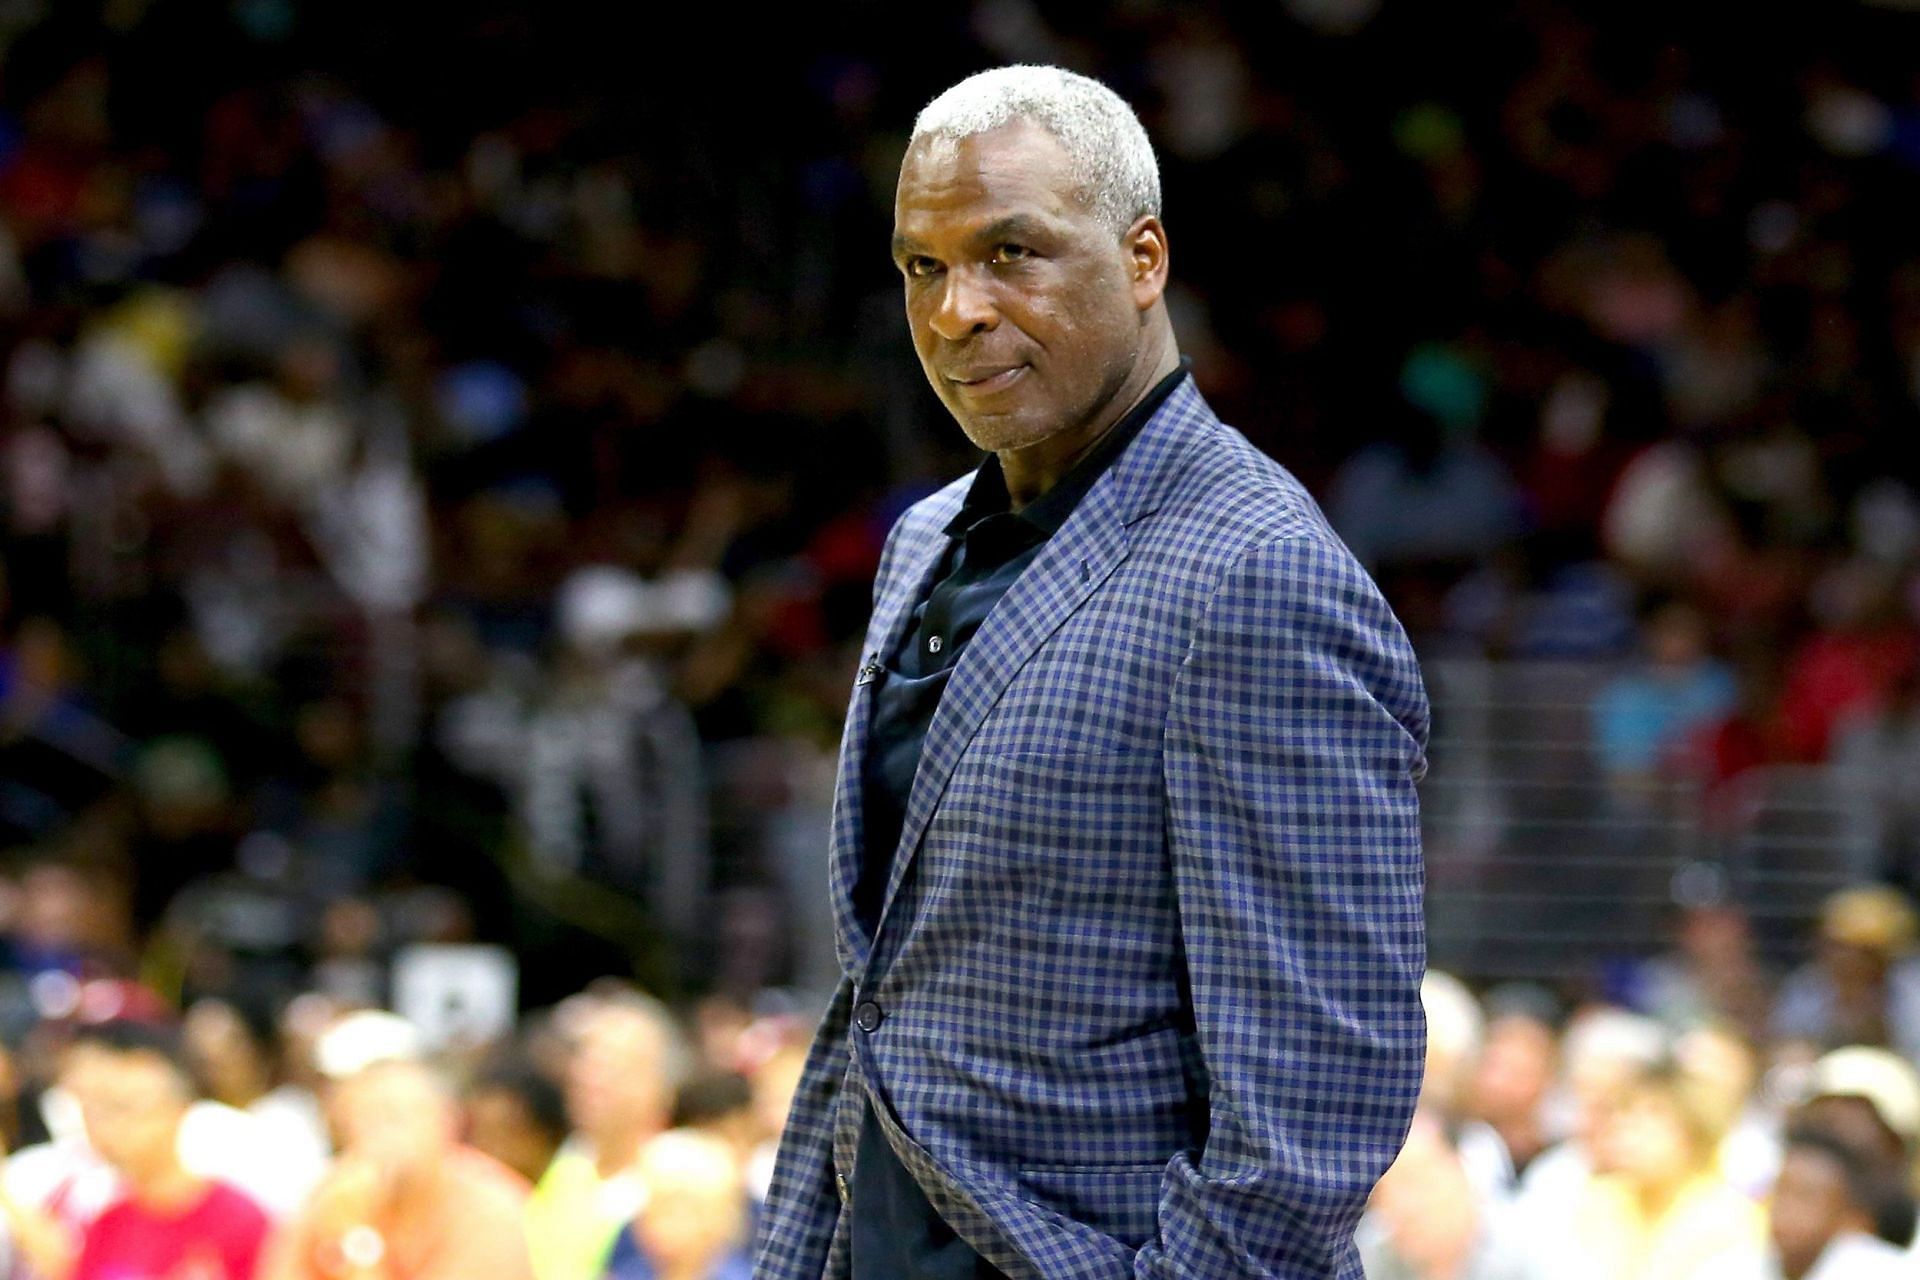 It's more almost like a daycare, you got to babysit these guys” – Charles  Oakley shares perspective on modern NBA